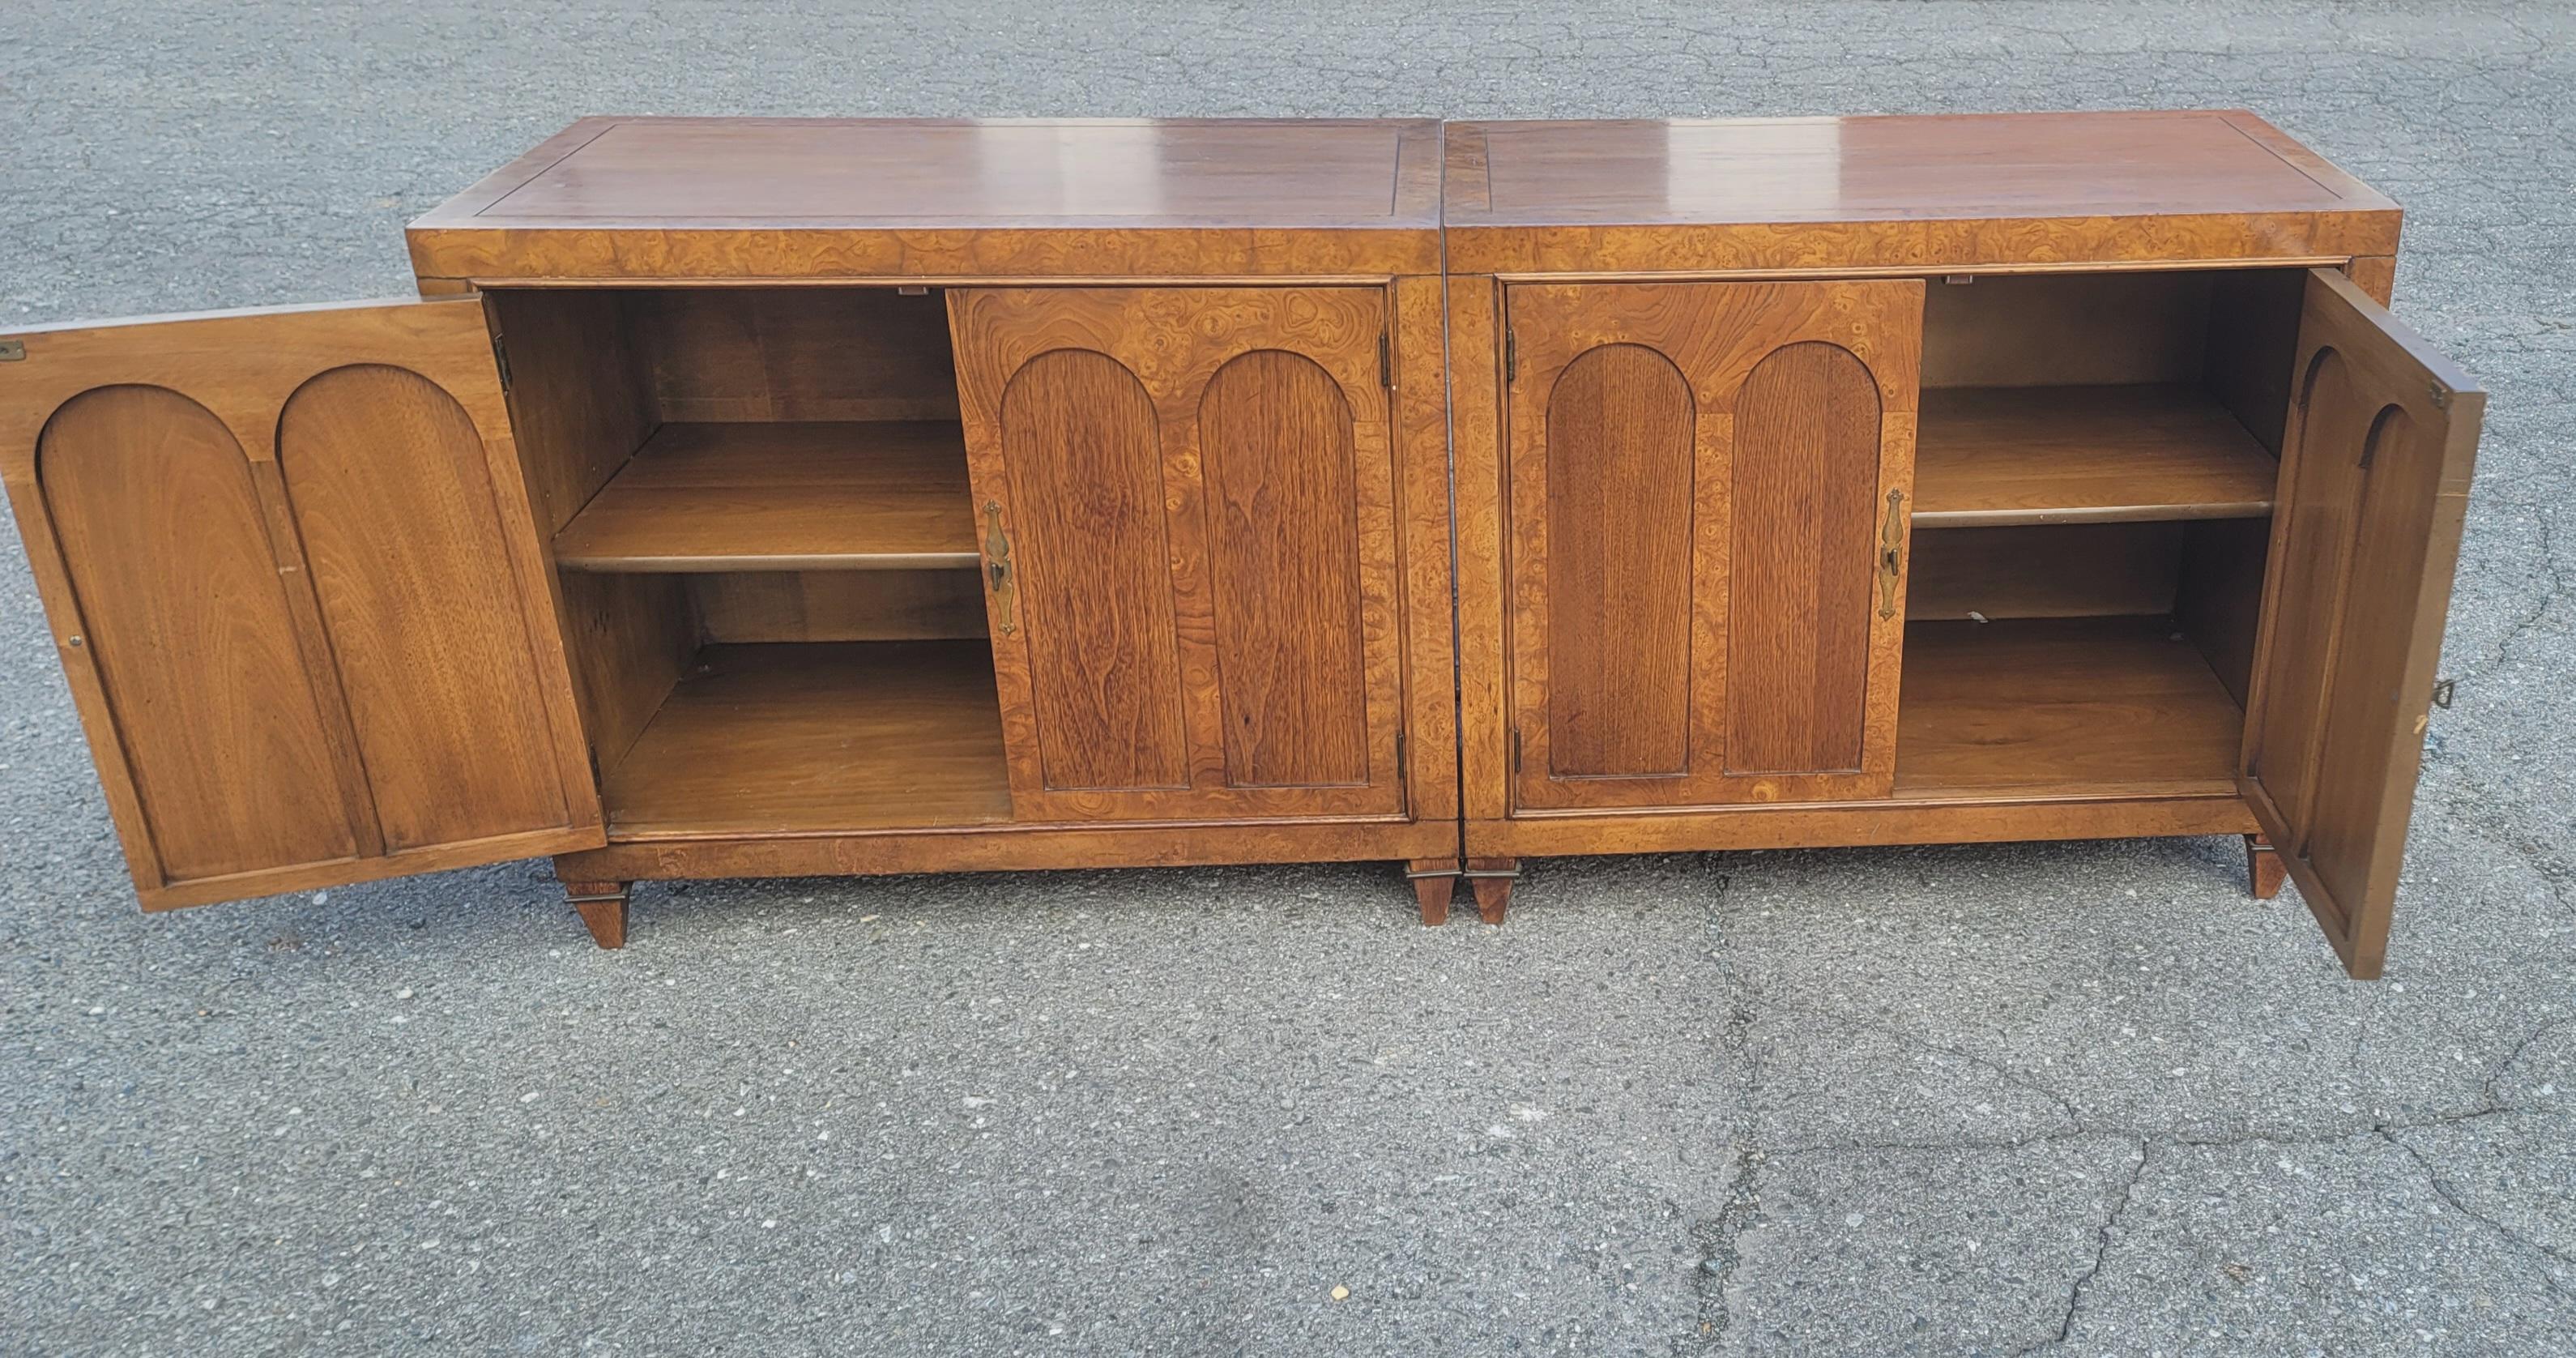 Pair of Mastercraft Burled and Walnut Colonnade Cabinets Credenza Buffet Server In Good Condition For Sale In Germantown, MD